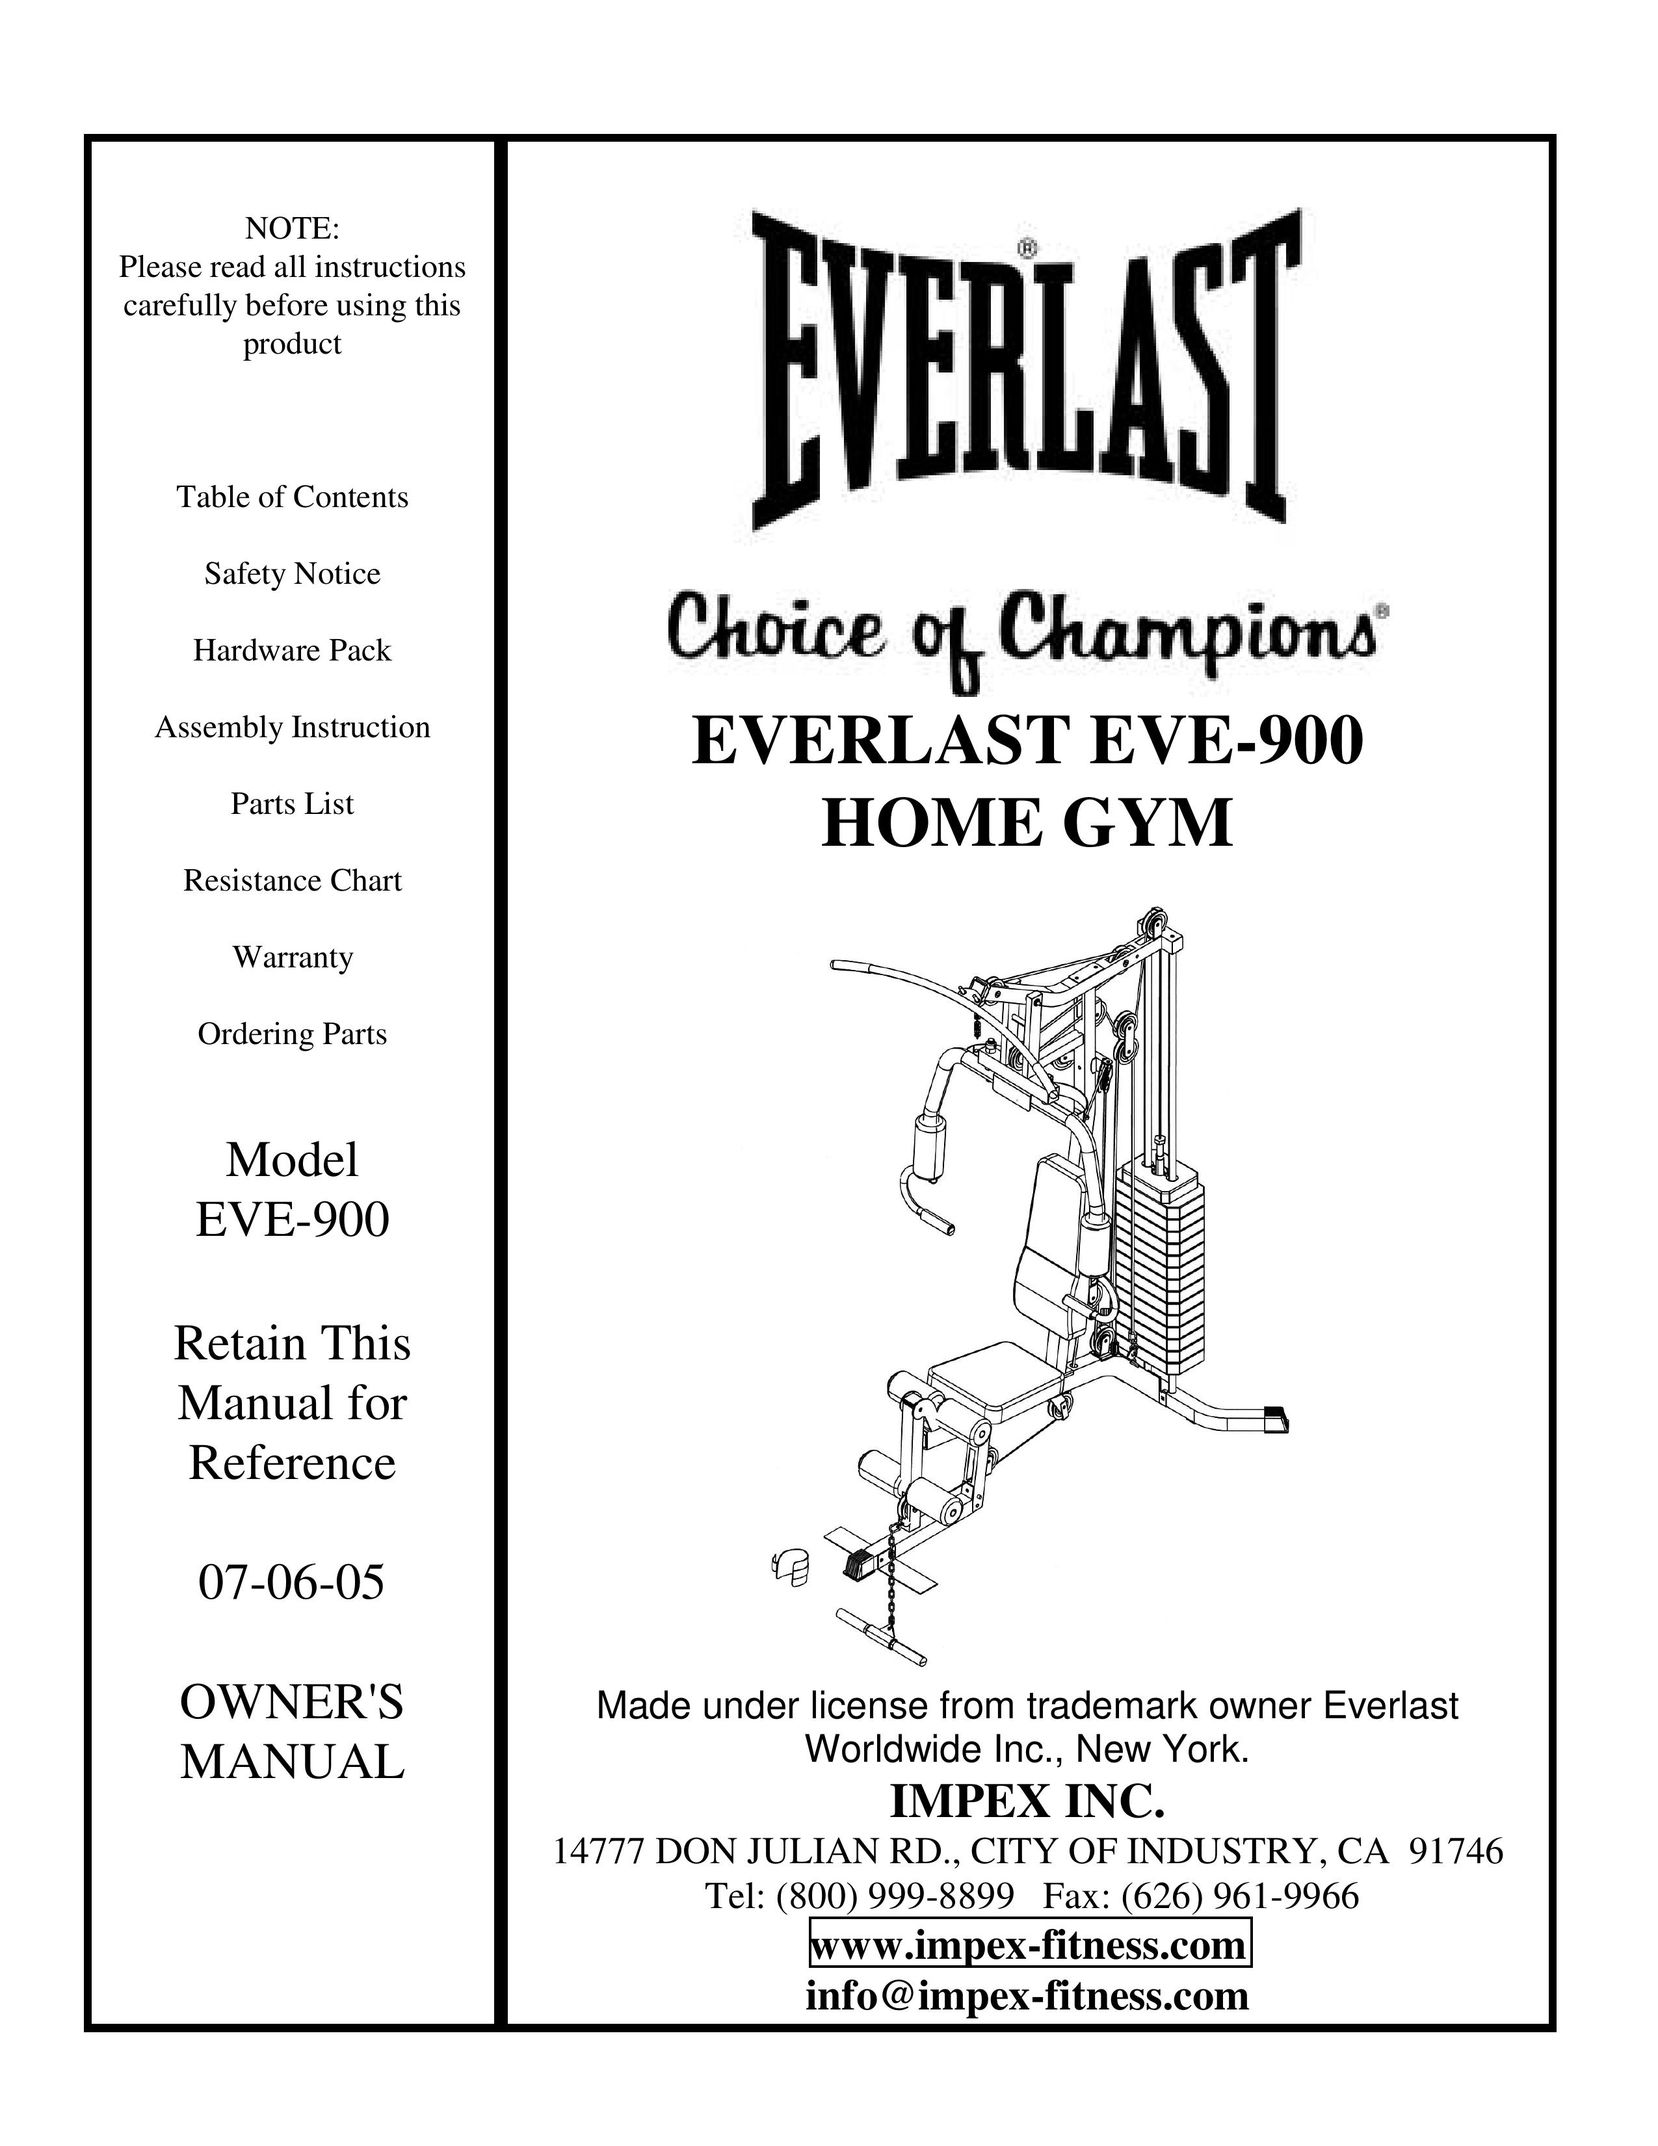 Impex EVE-900 Home Gym User Manual